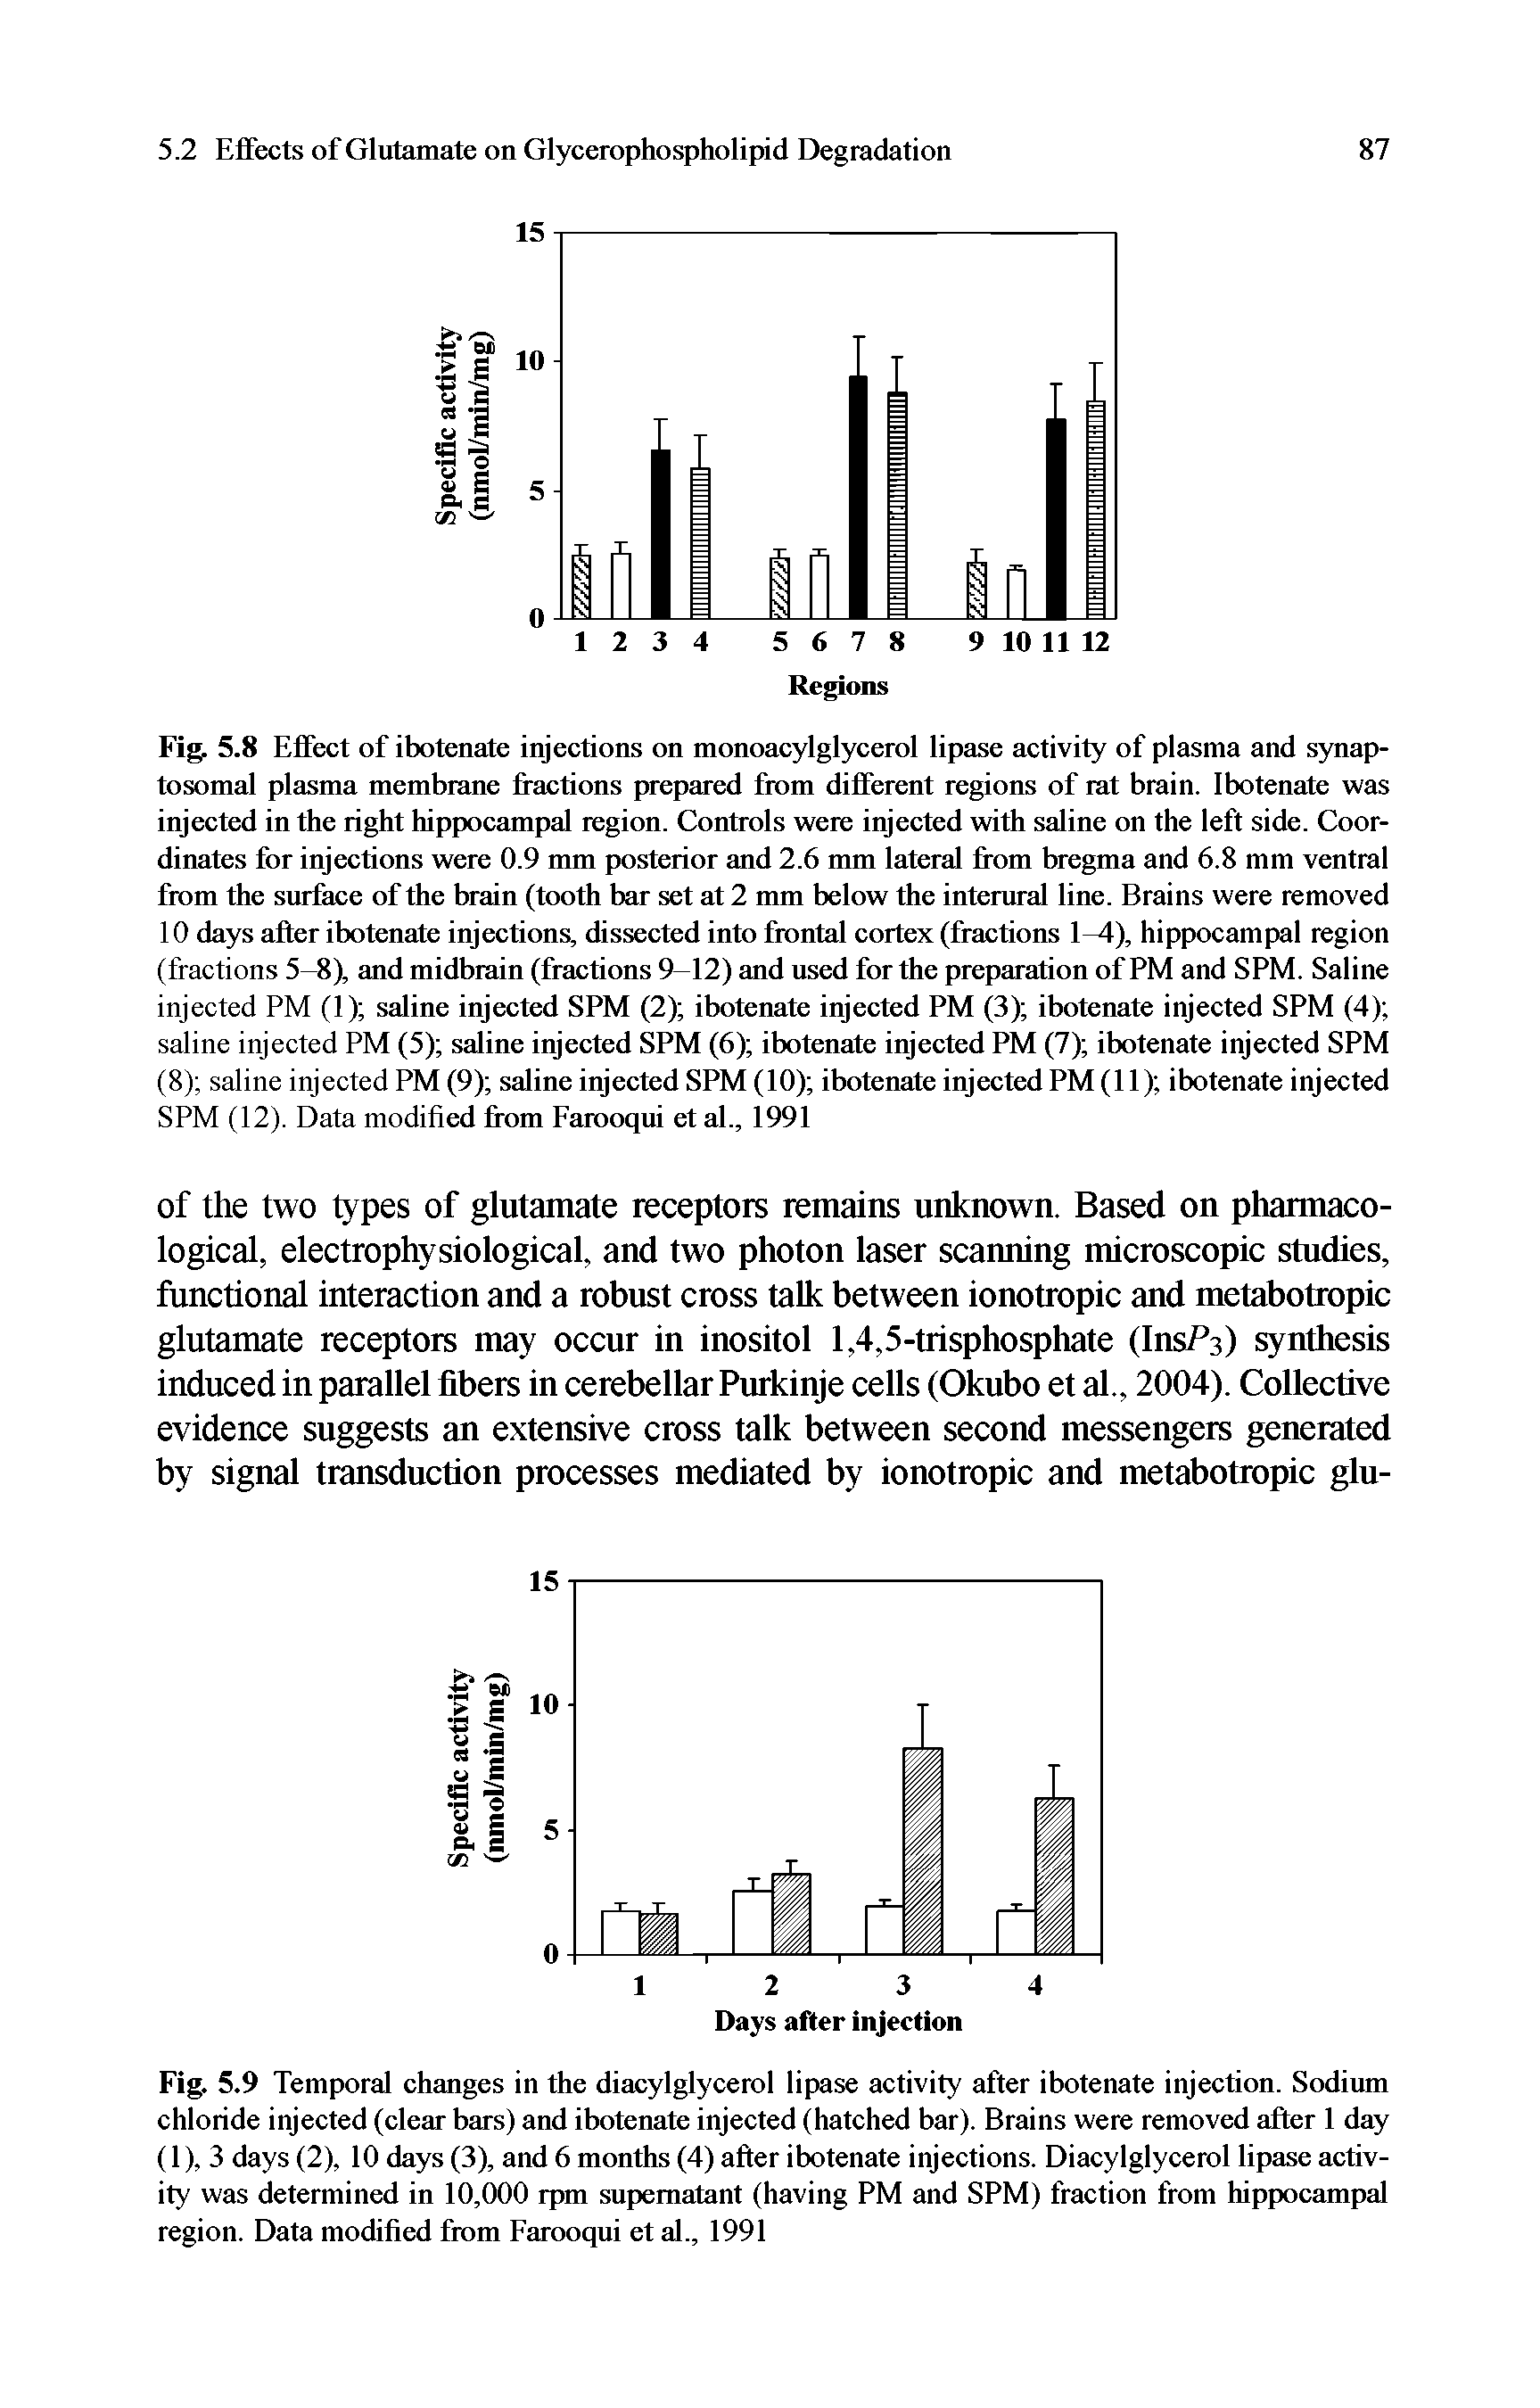 Fig. 5.9 Temporal changes in the diacylglycerol lipase activity after ibotenate injection. Sodium chloride injected (clear bars) and ibotenate injected (hatched bar). Brains were removed after 1 day (1), 3 days (2), 10 days (3), and 6 months (4) after ibotenate injections. Diacylglycerol lipase activity was determined in 10,000 rpm supernatant (having PM and SPM) fraction from hippocampal region. Data modified from Farooqui et at., 1991...